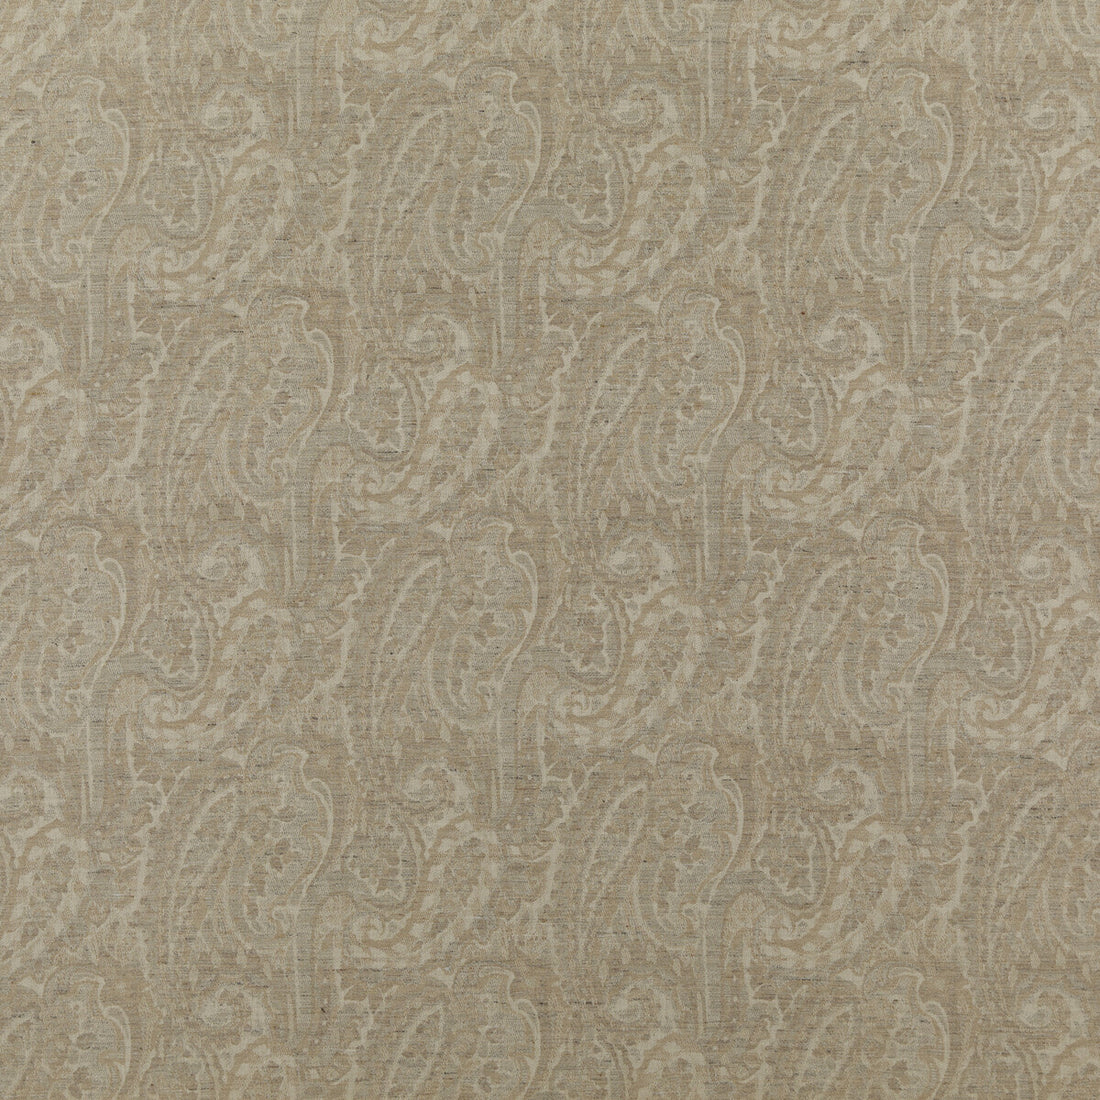 Fairfield Paisley fabric in sand color - pattern FD777.N102.0 - by Mulberry in the Modern Country collection